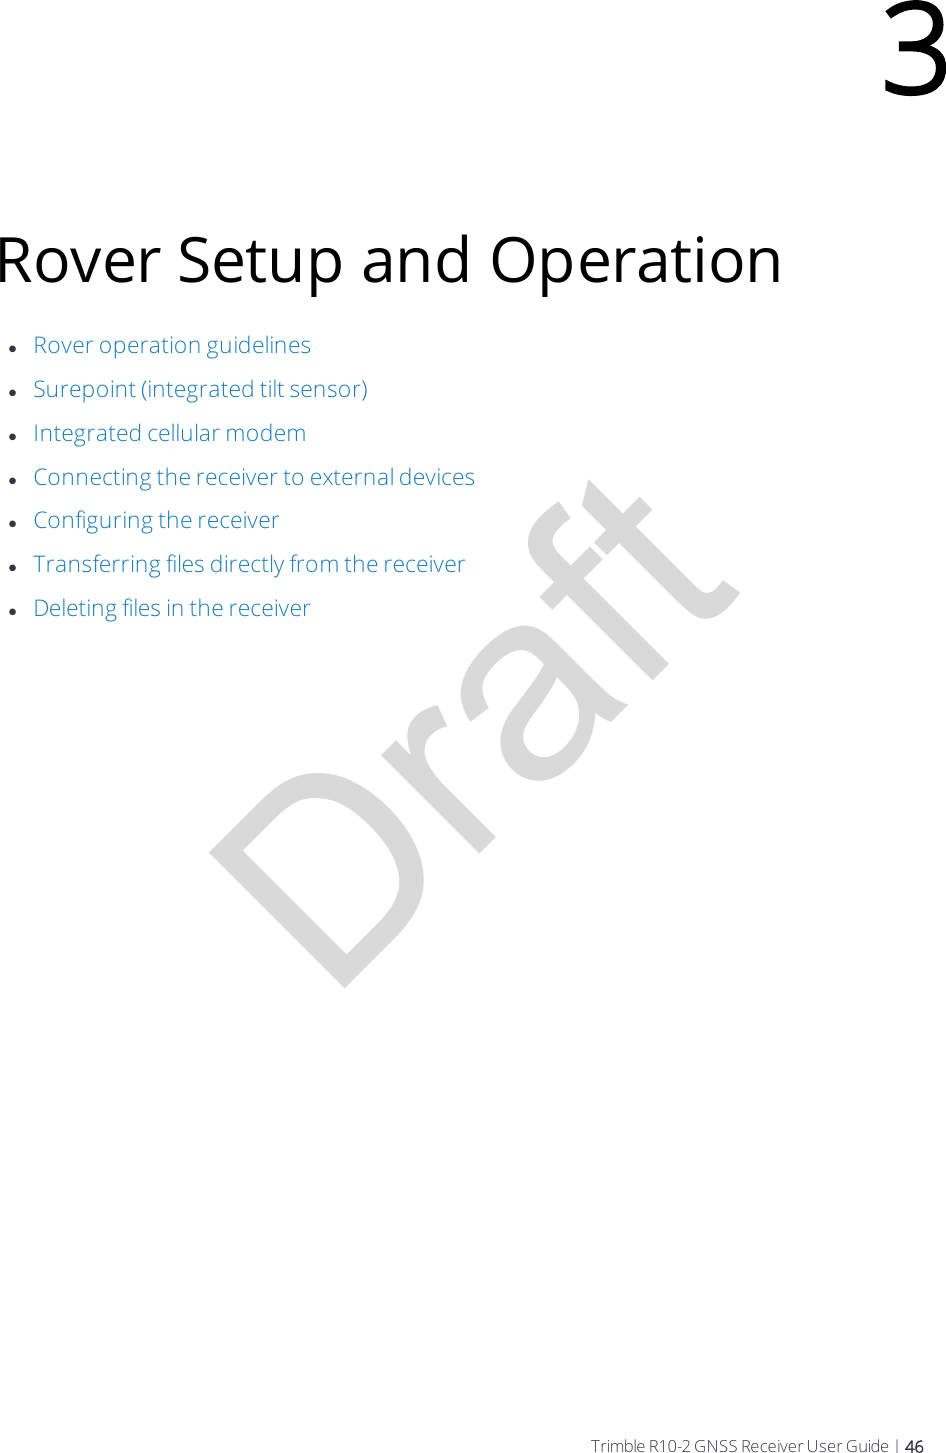 DraftRover Setup and OperationlRover operation guidelineslSurepoint (integrated tilt sensor)lIntegrated cellular modemlConnecting the receiver to external deviceslConfiguring the receiverlTransferring files directly from the receiverlDeleting files in the receiver3Trimble R10-2 GNSS Receiver User Guide | 46